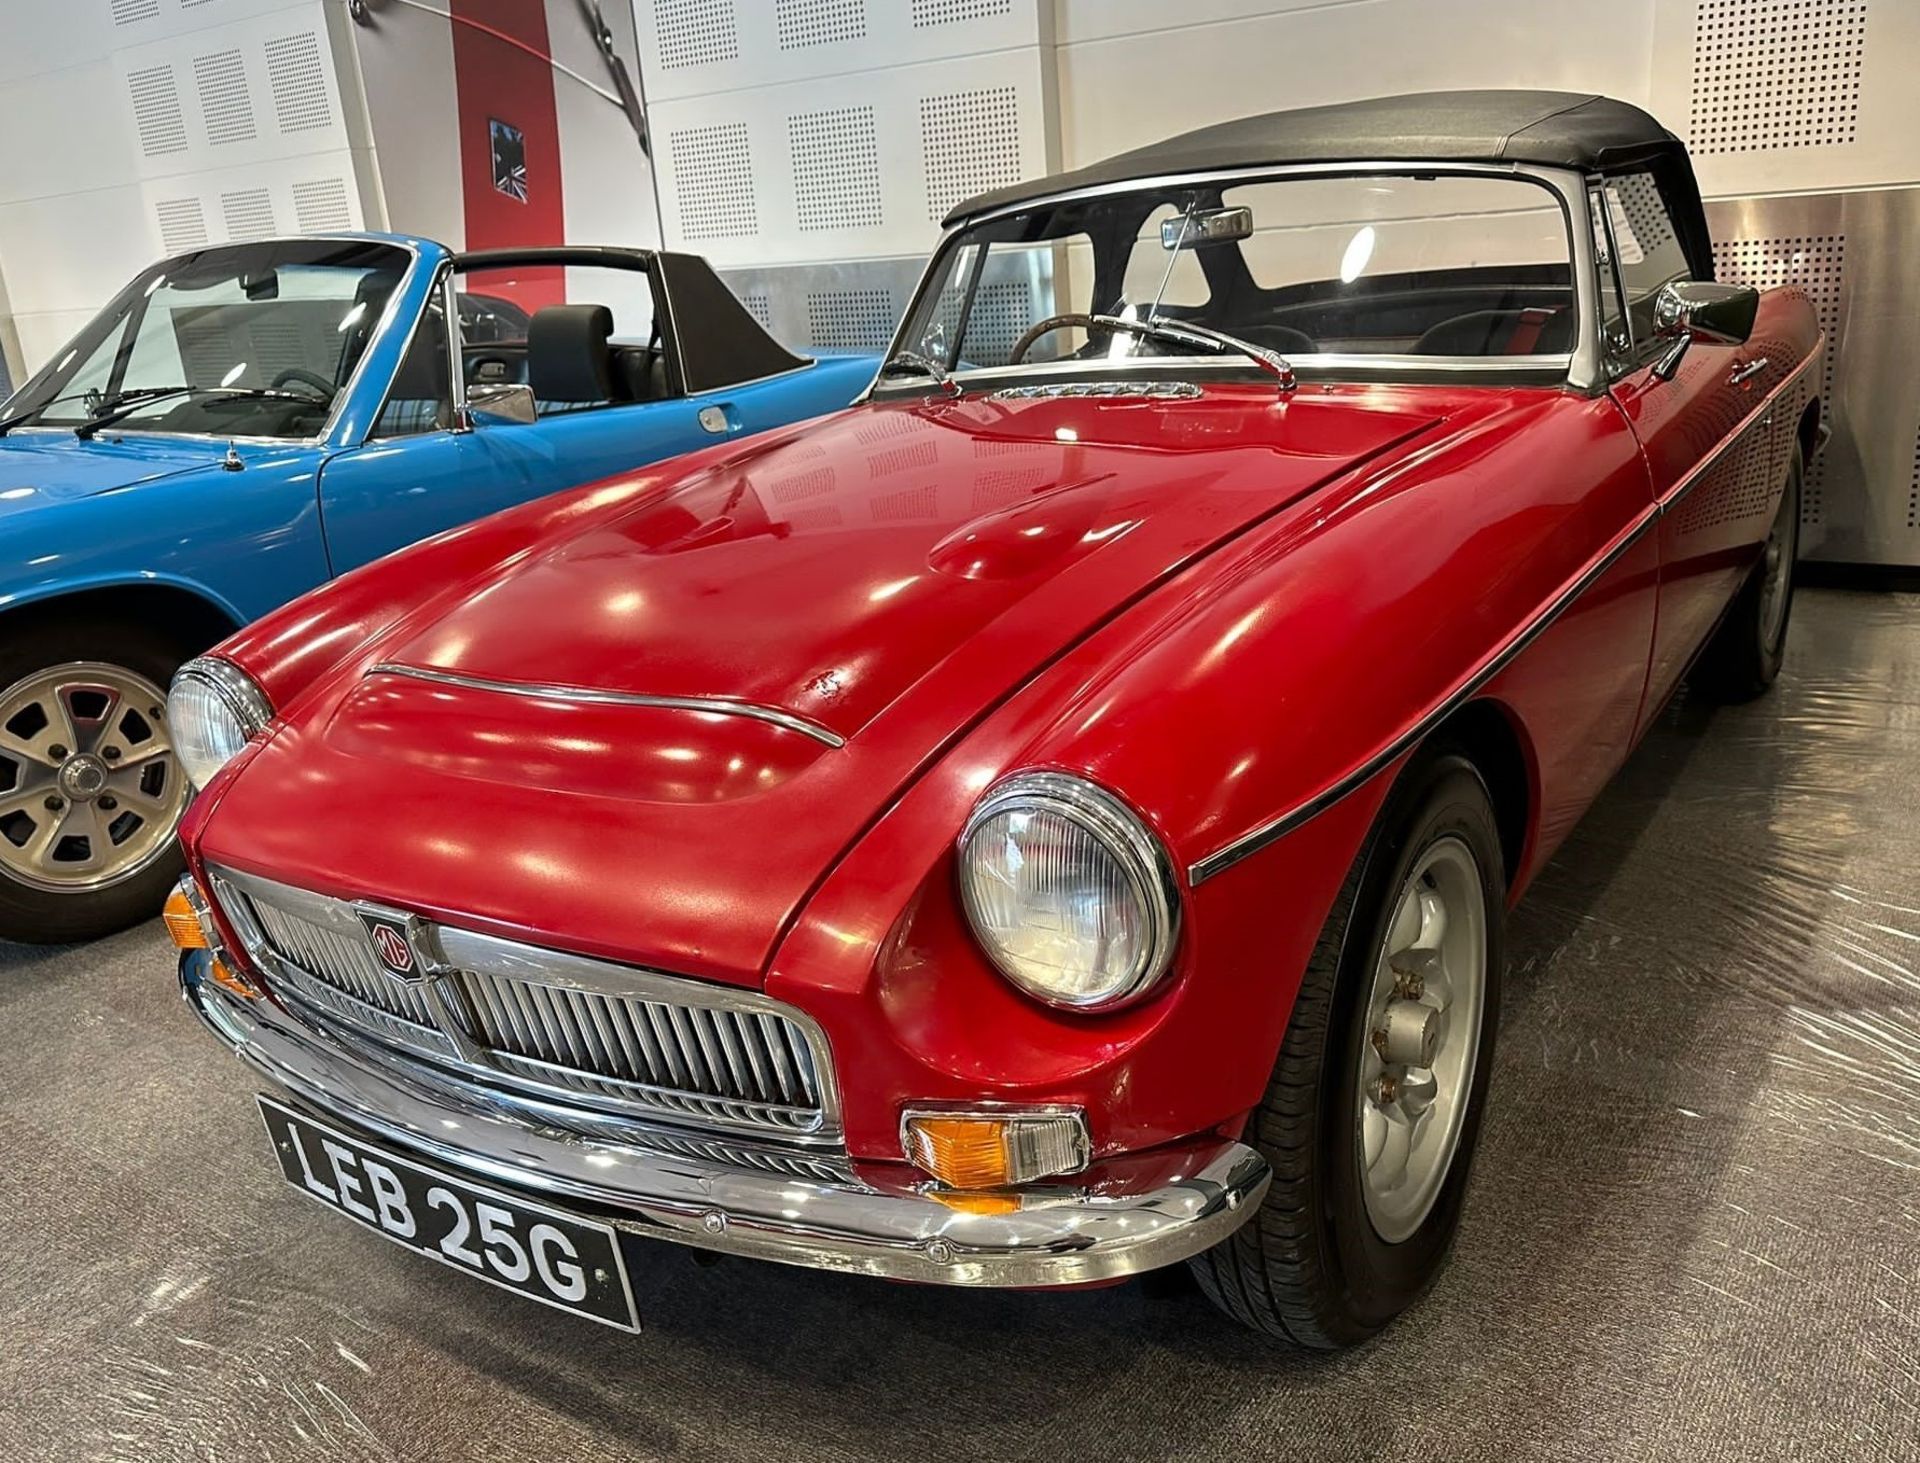 1968 MG C Downton Roadster Registration number LEB 25G Tartan red with a black interior with red - Image 2 of 42